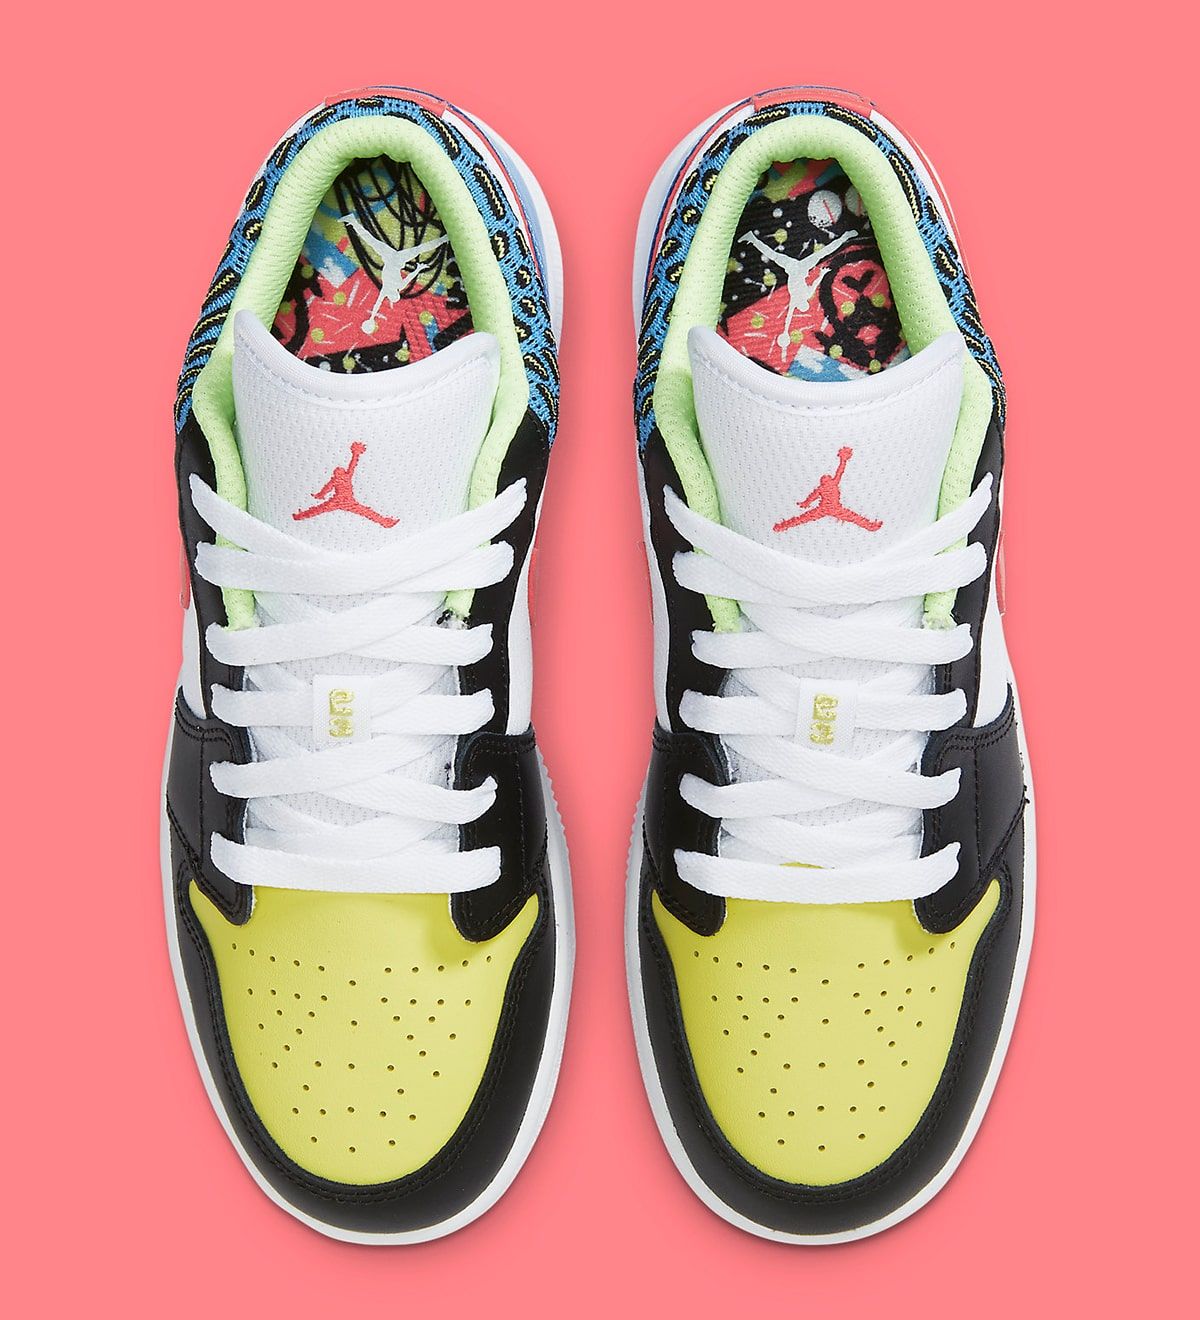 Colorful New Air Jordan 1 Low is Available Now! | HOUSE OF HEAT